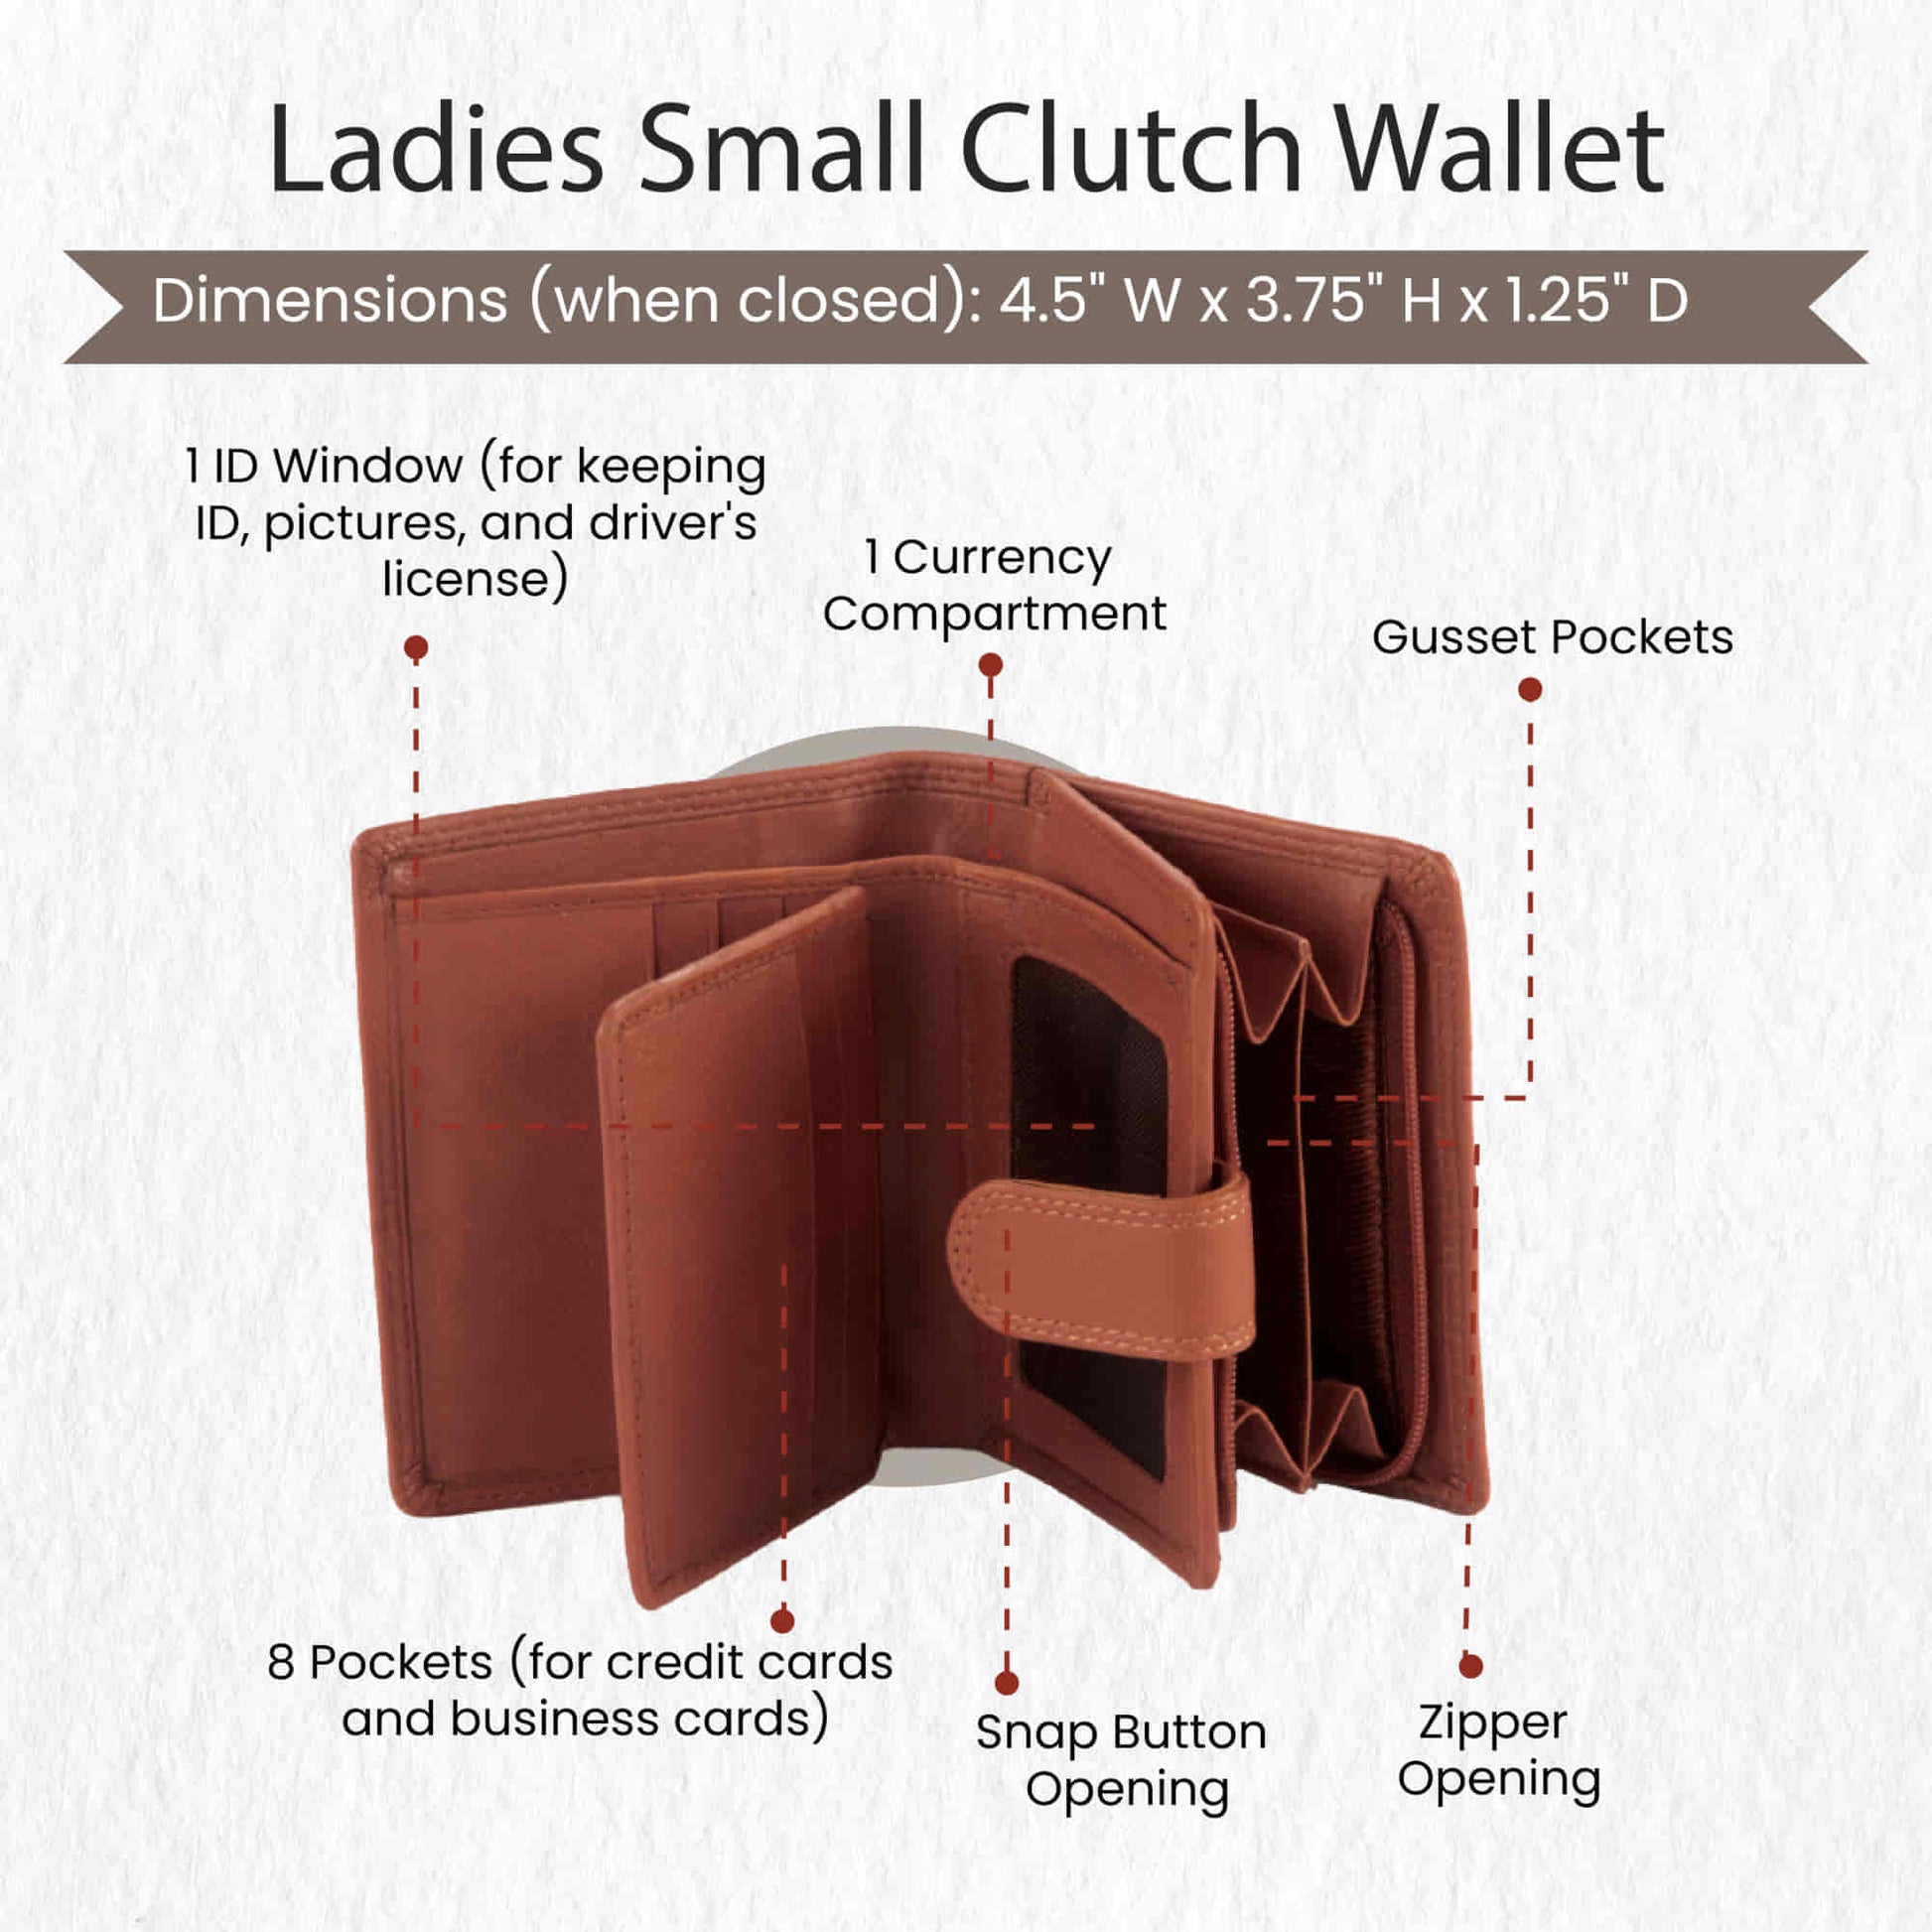 Style n Craft 300952-CG Small Clutch Wallet for Ladies in Leather in tan color - open view showing the details